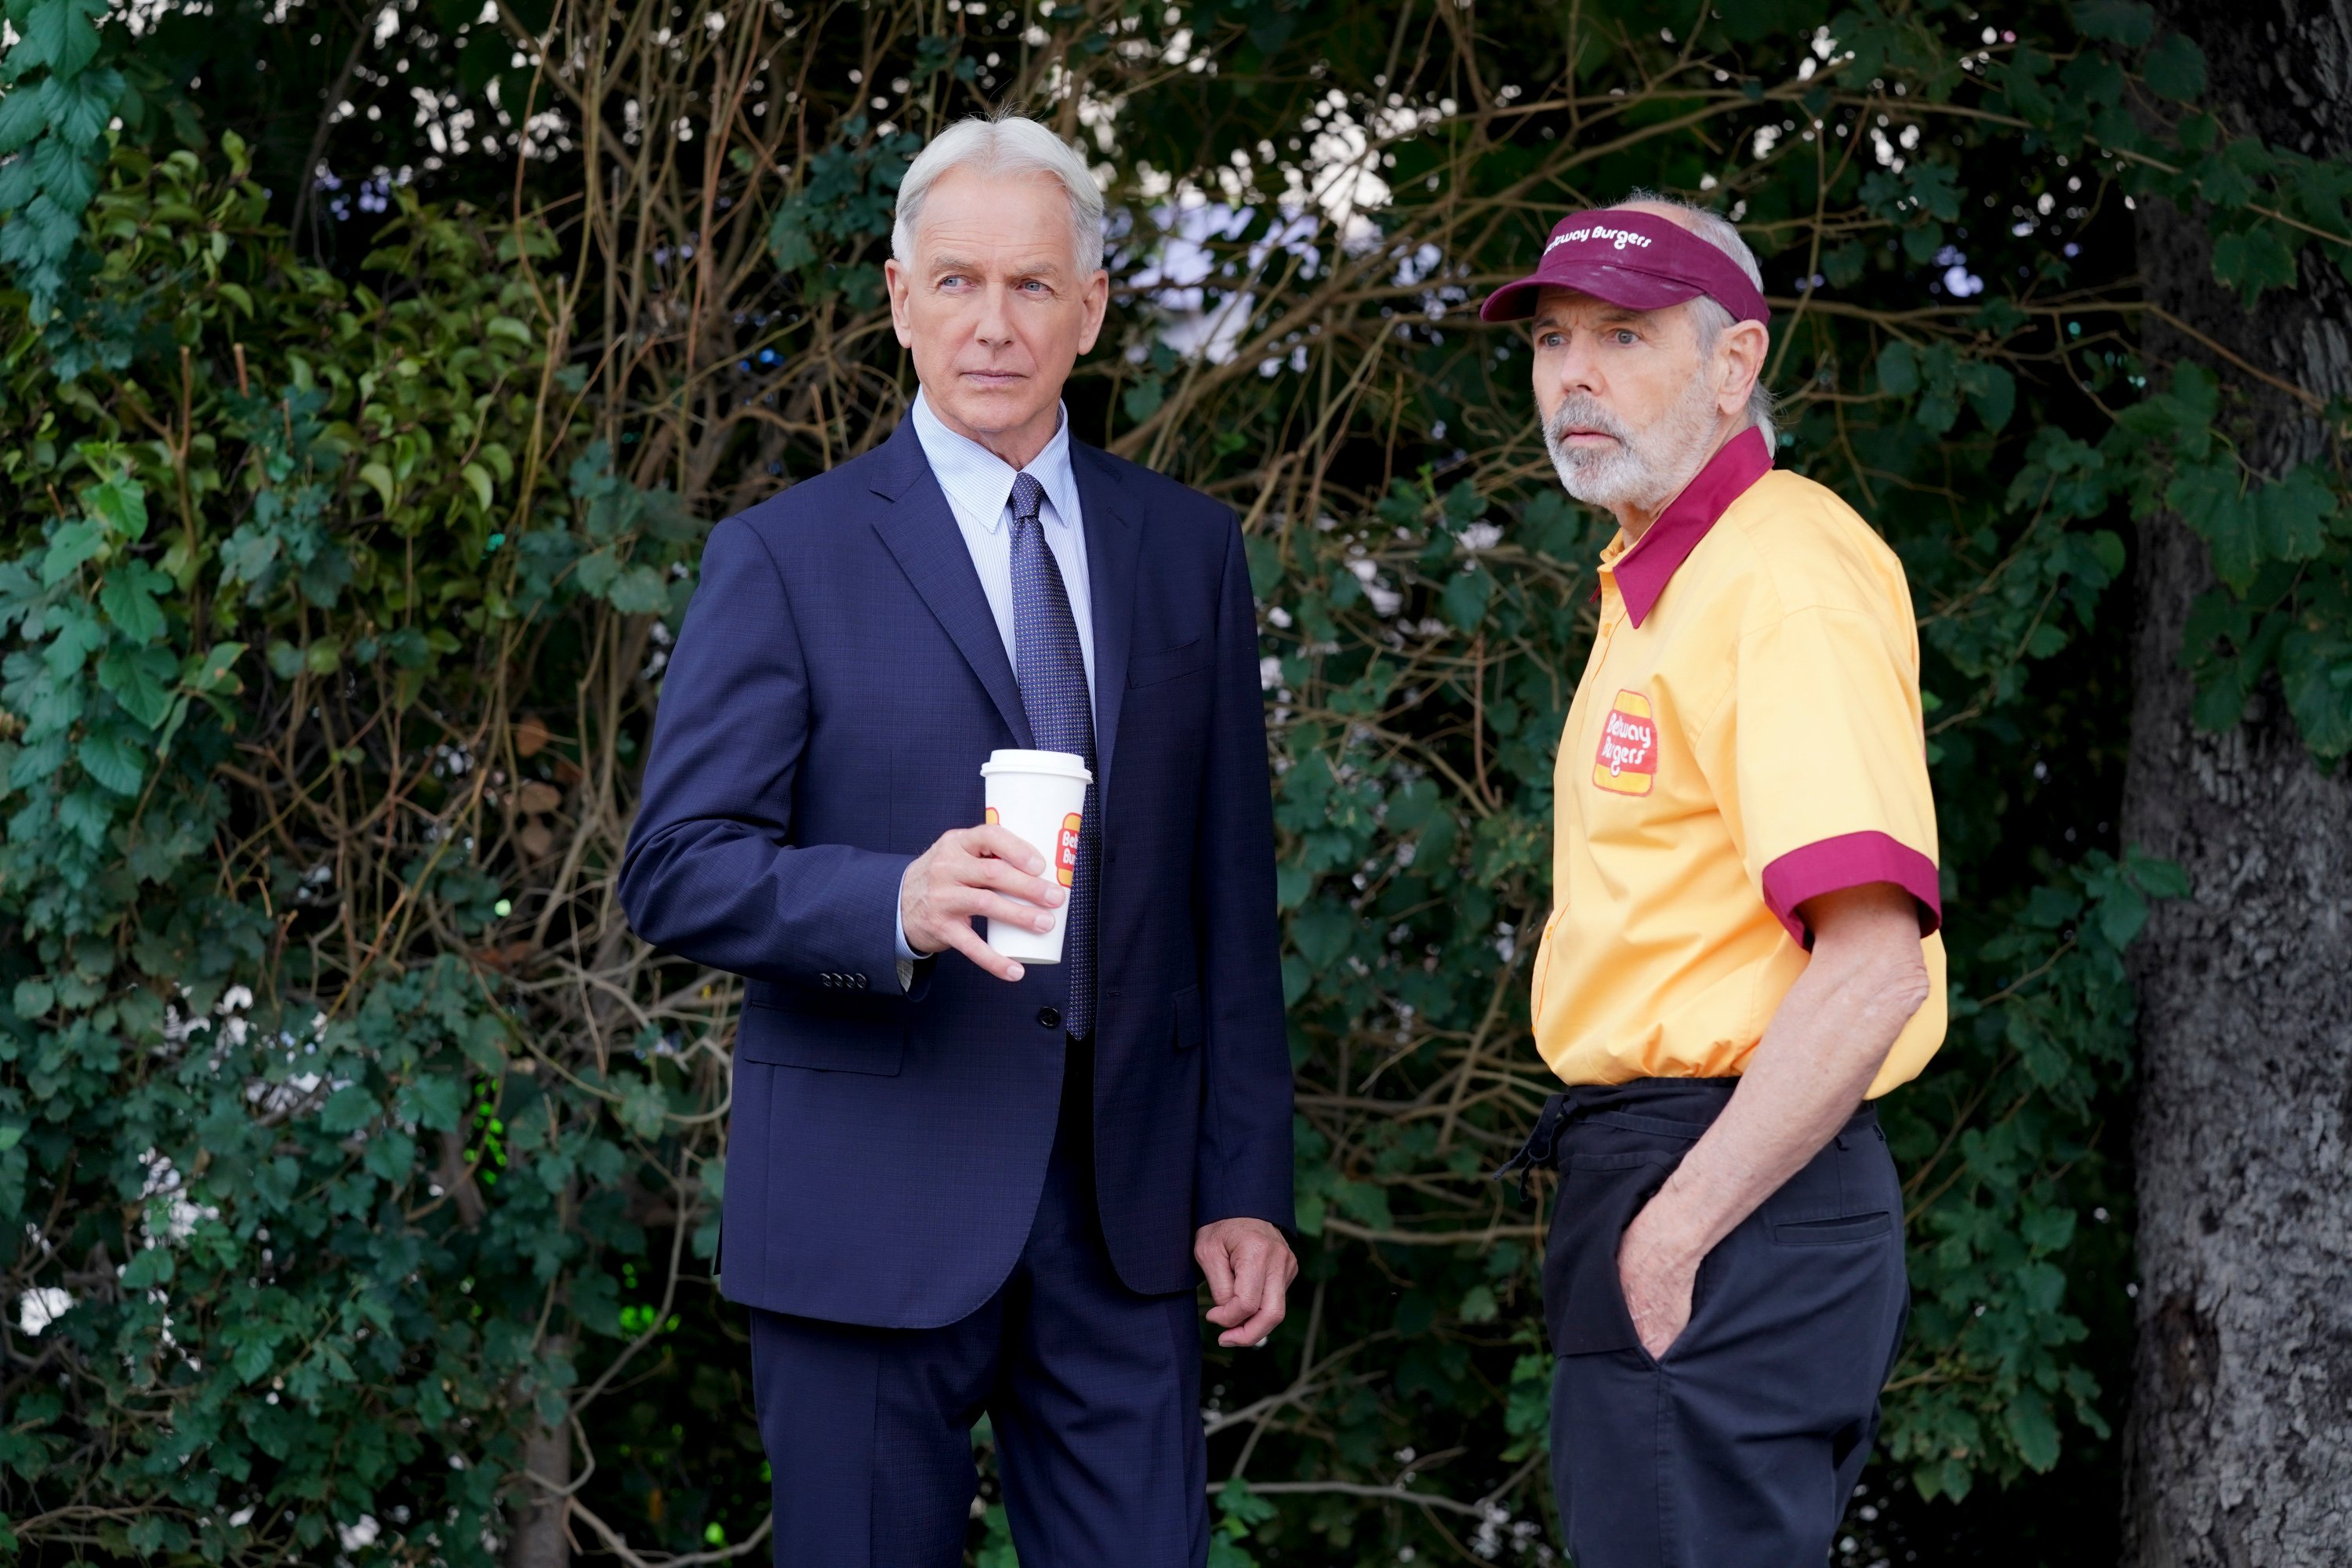 Mark Harmon as NCIS Special Agent Leroy Jethro Gibbs and Joe Spano as Tobias T.C. Fornell | Sonja Flemming/CBS via Getty Images